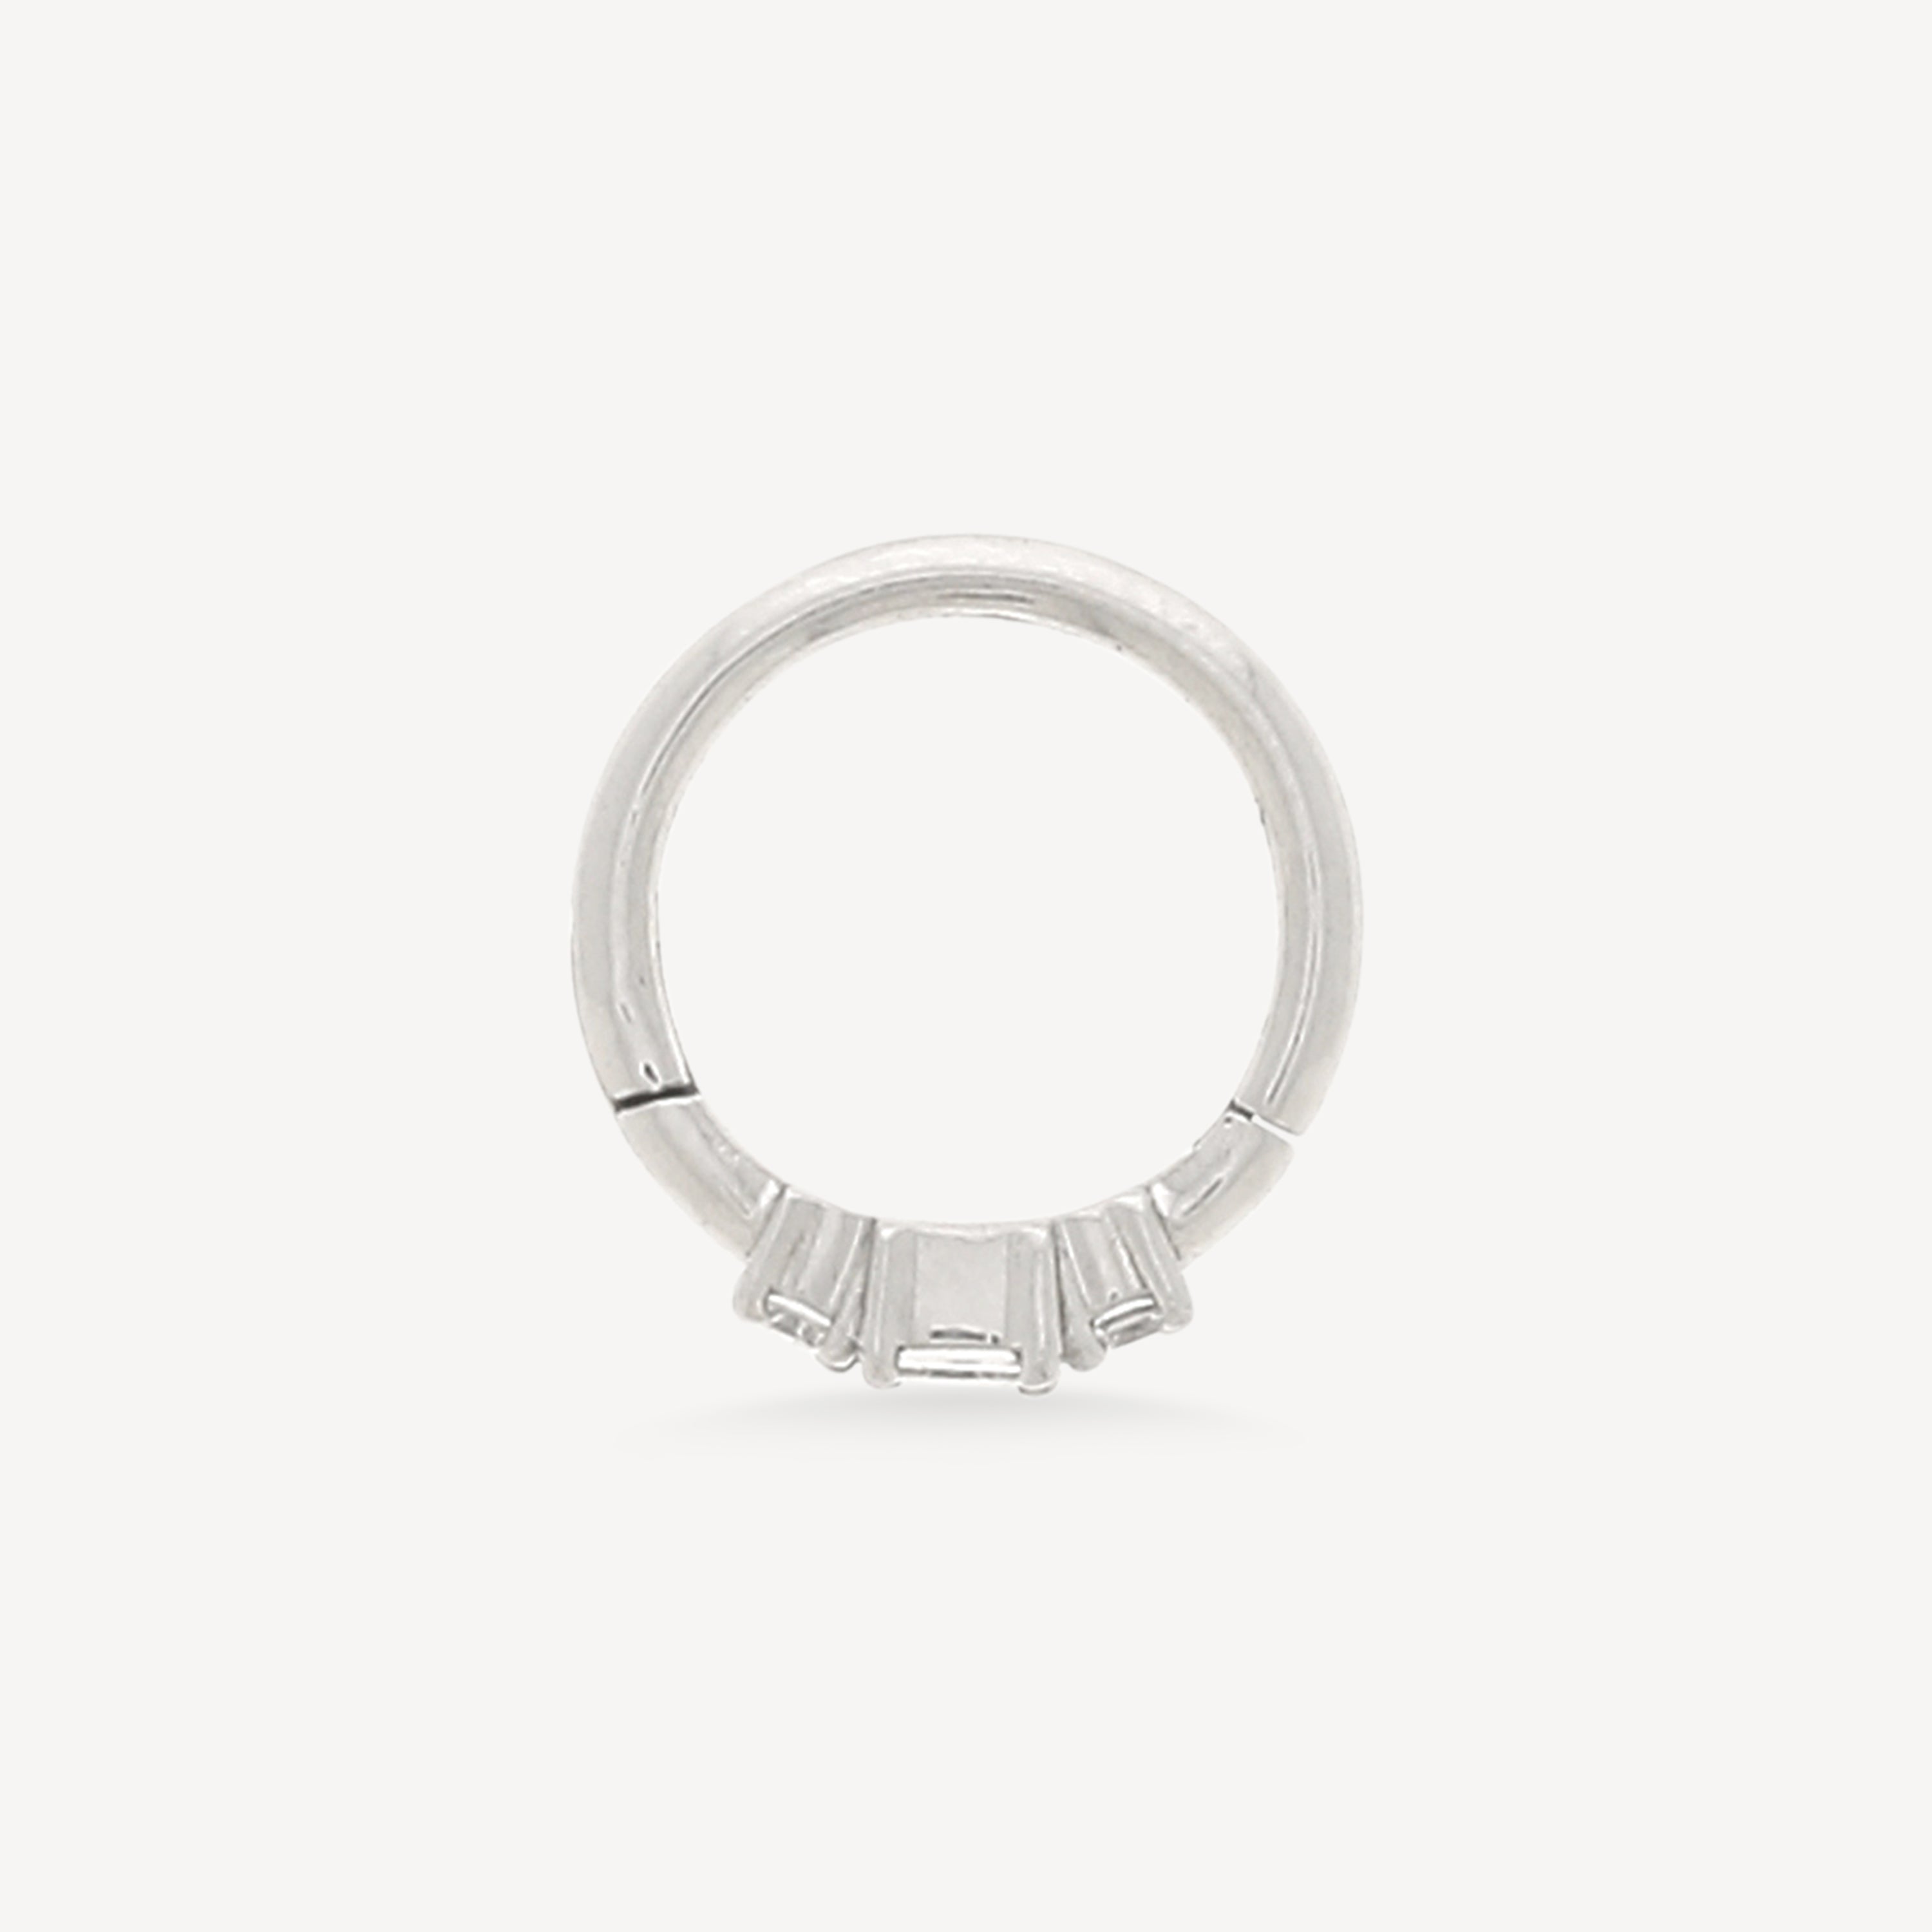 8mm White Gold and Diamonds 2x2mm Hoop